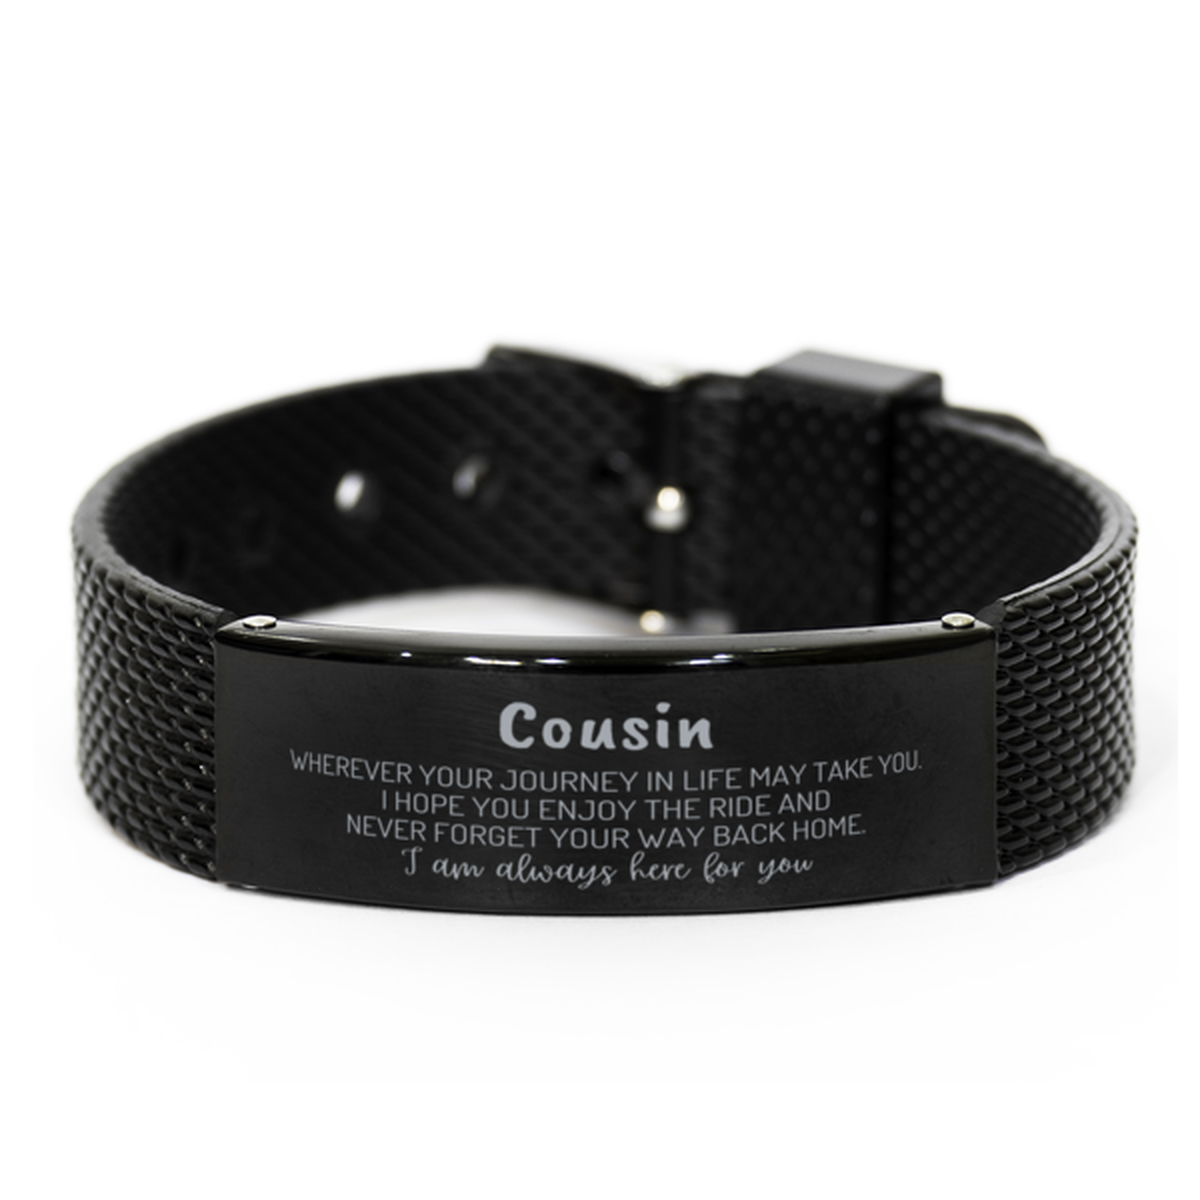 Cousin wherever your journey in life may take you, I am always here for you Cousin Black Shark Mesh Bracelet, Awesome Christmas Gifts For Cousin, Cousin Birthday Gifts for Men Women Family Loved One